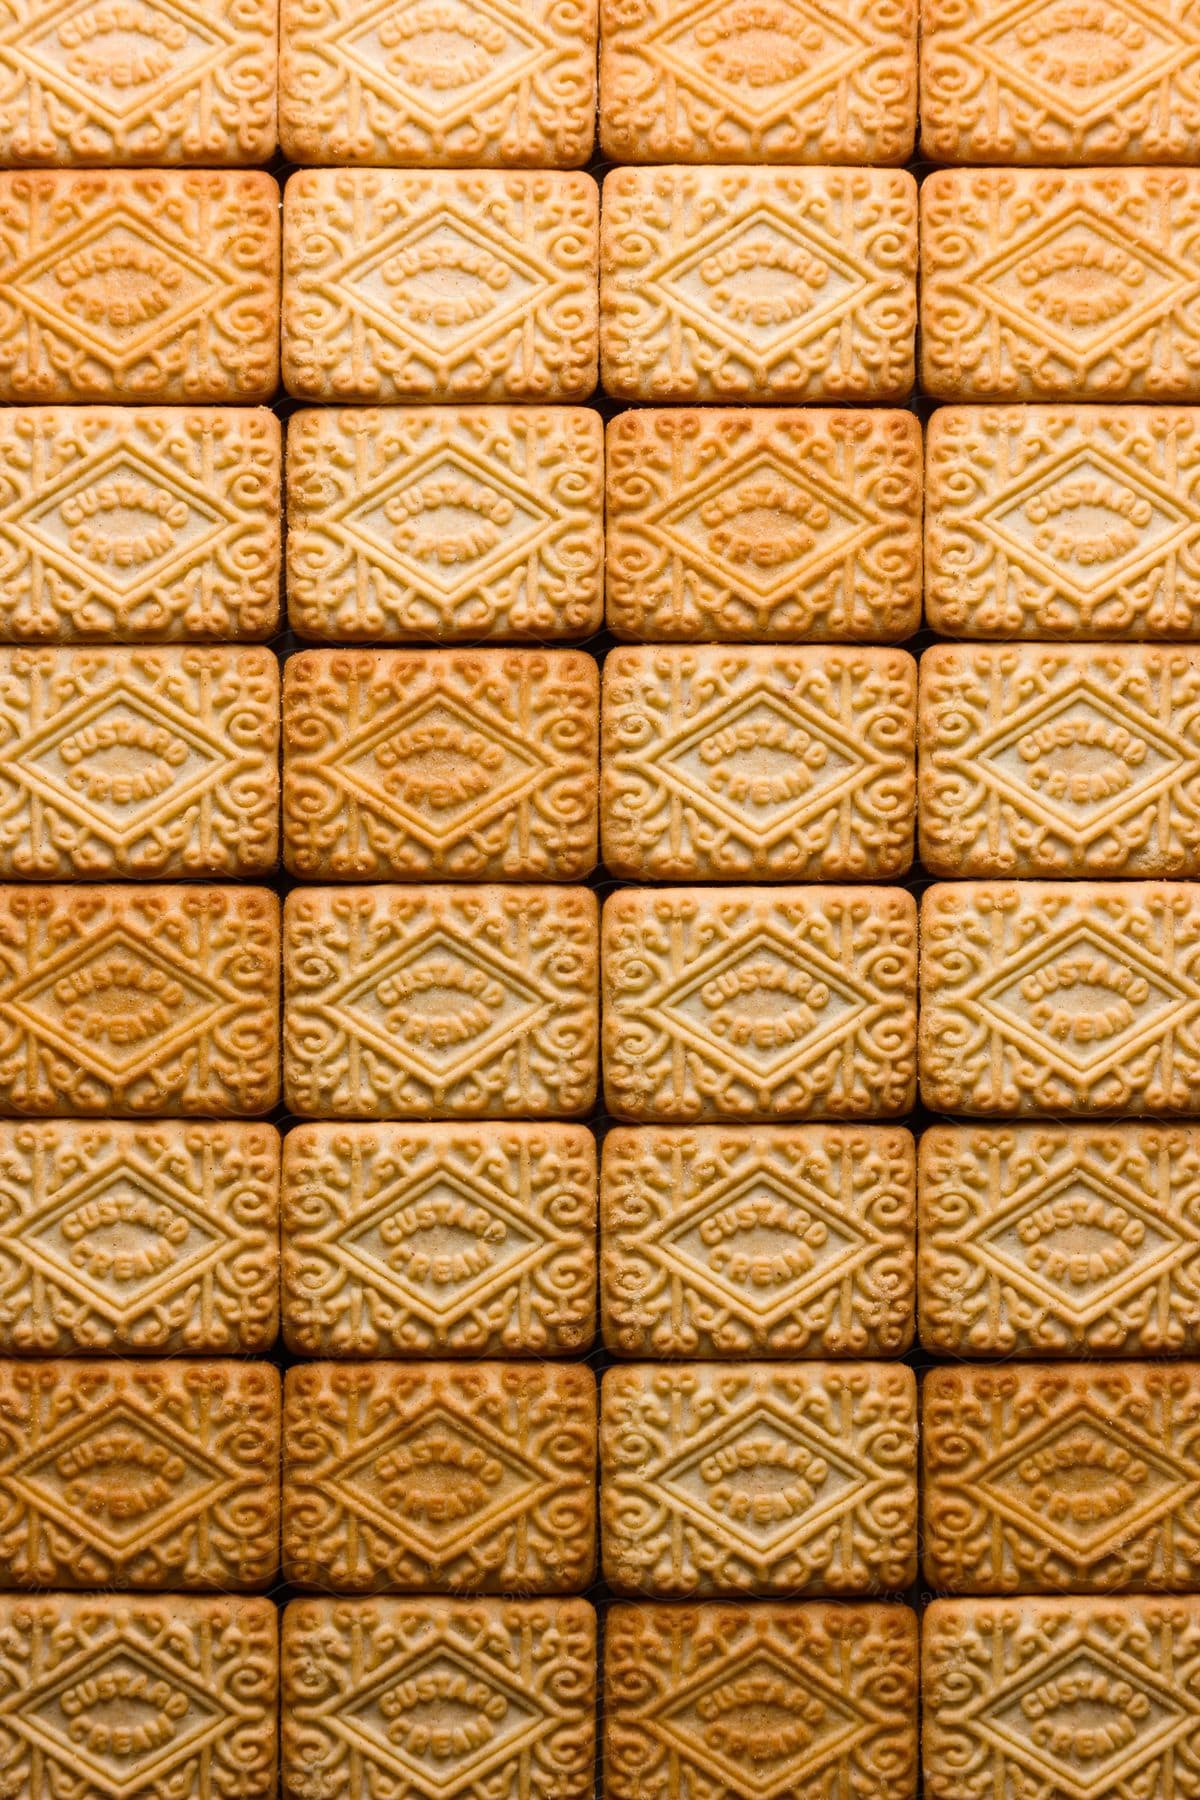 A sheet of custard cream biscuits laid end to end